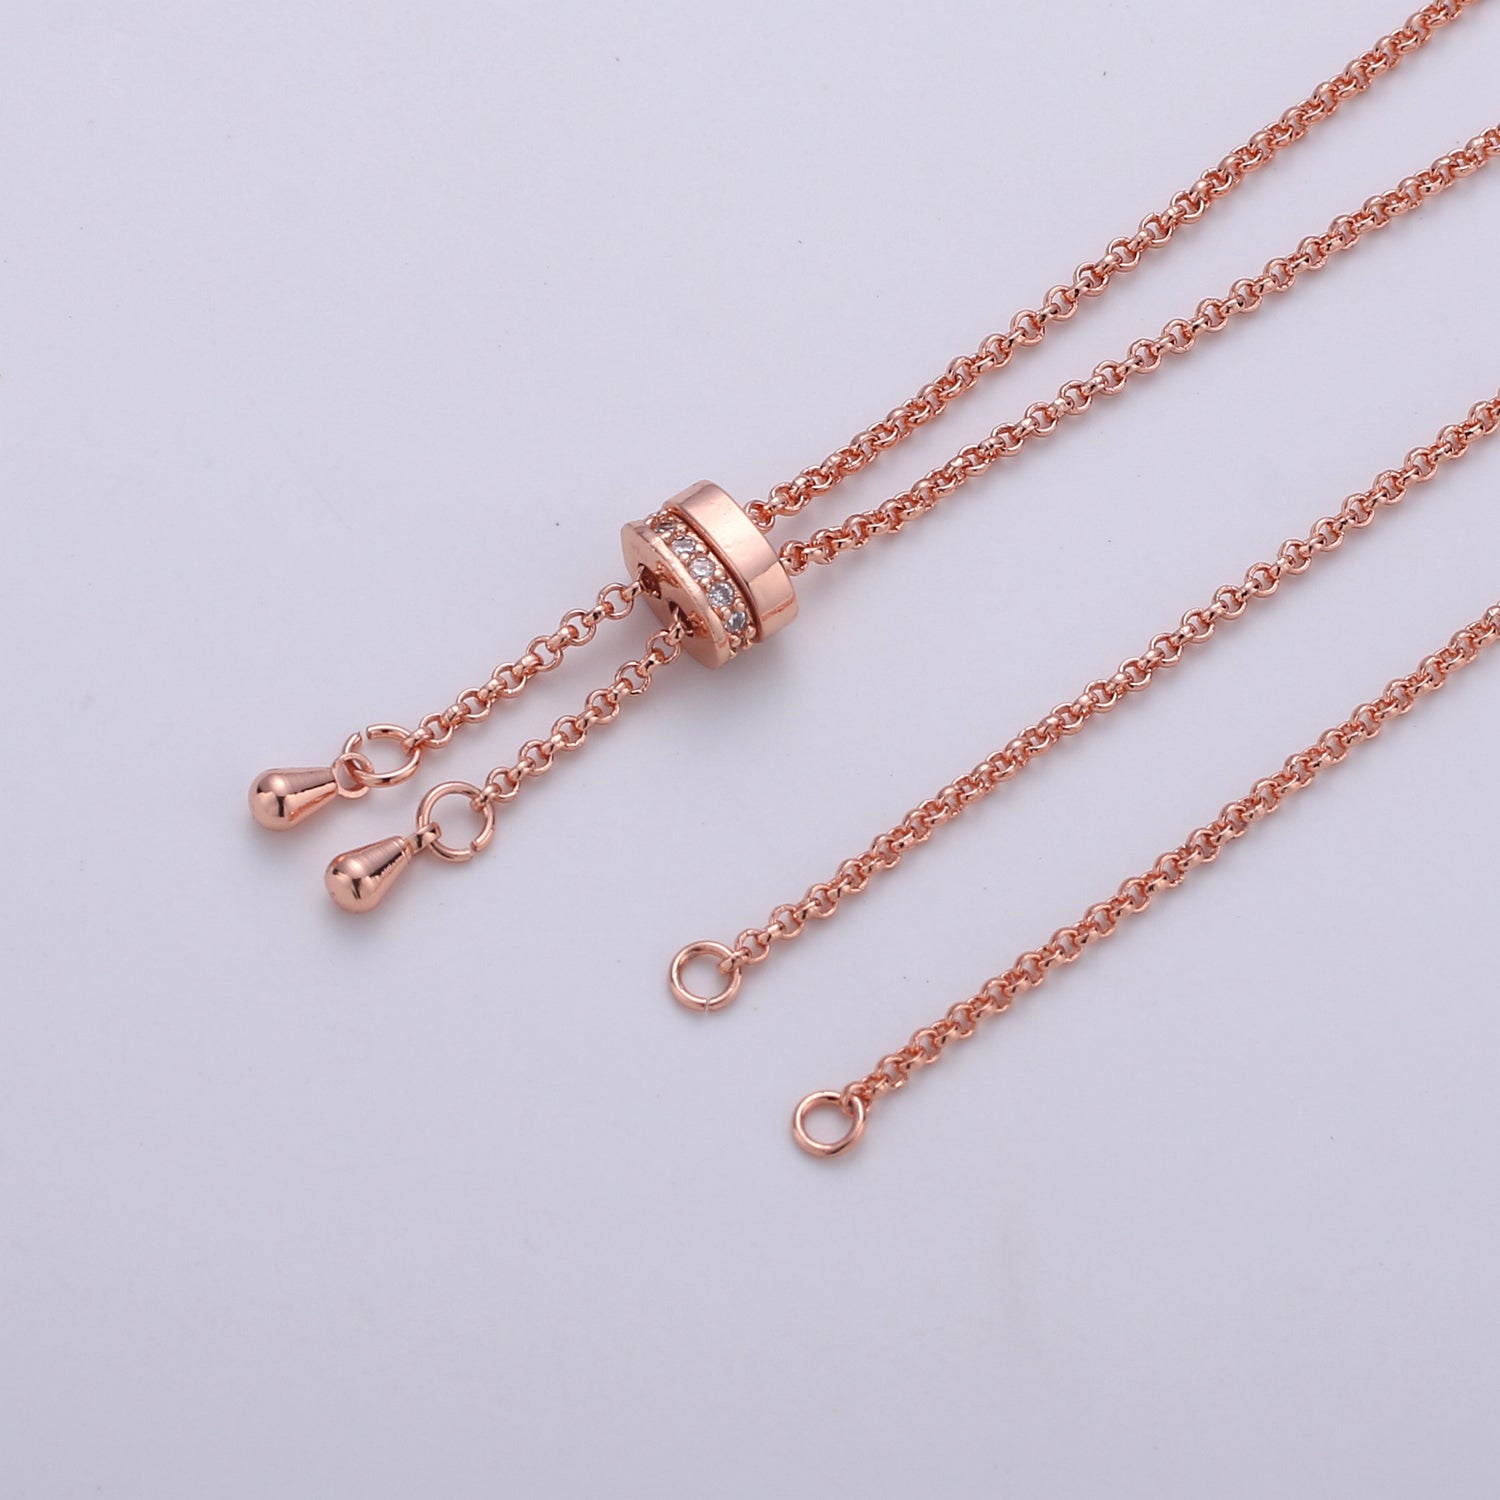 14k Gold Filled Adjustable Necklace Half finished Chain Necklace with rubber stopper Rose Gold, Silver, Black Rolo Chain Wholesale 1pc/10pcs - DLUXCA